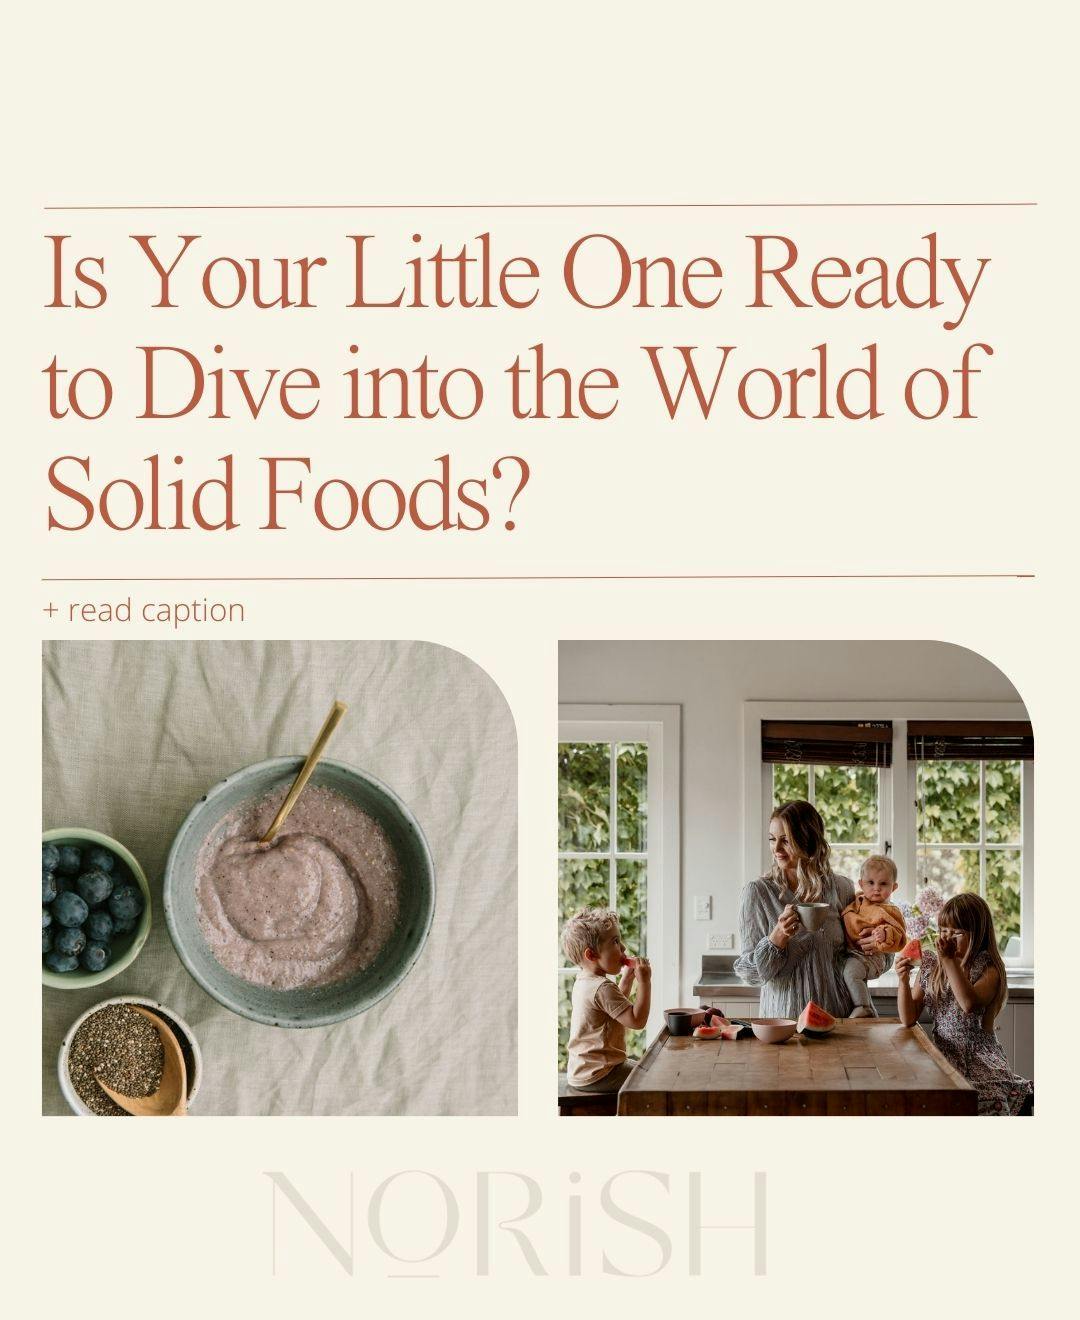 Is Your Little One Ready to Dive into the World of Solid Foods?